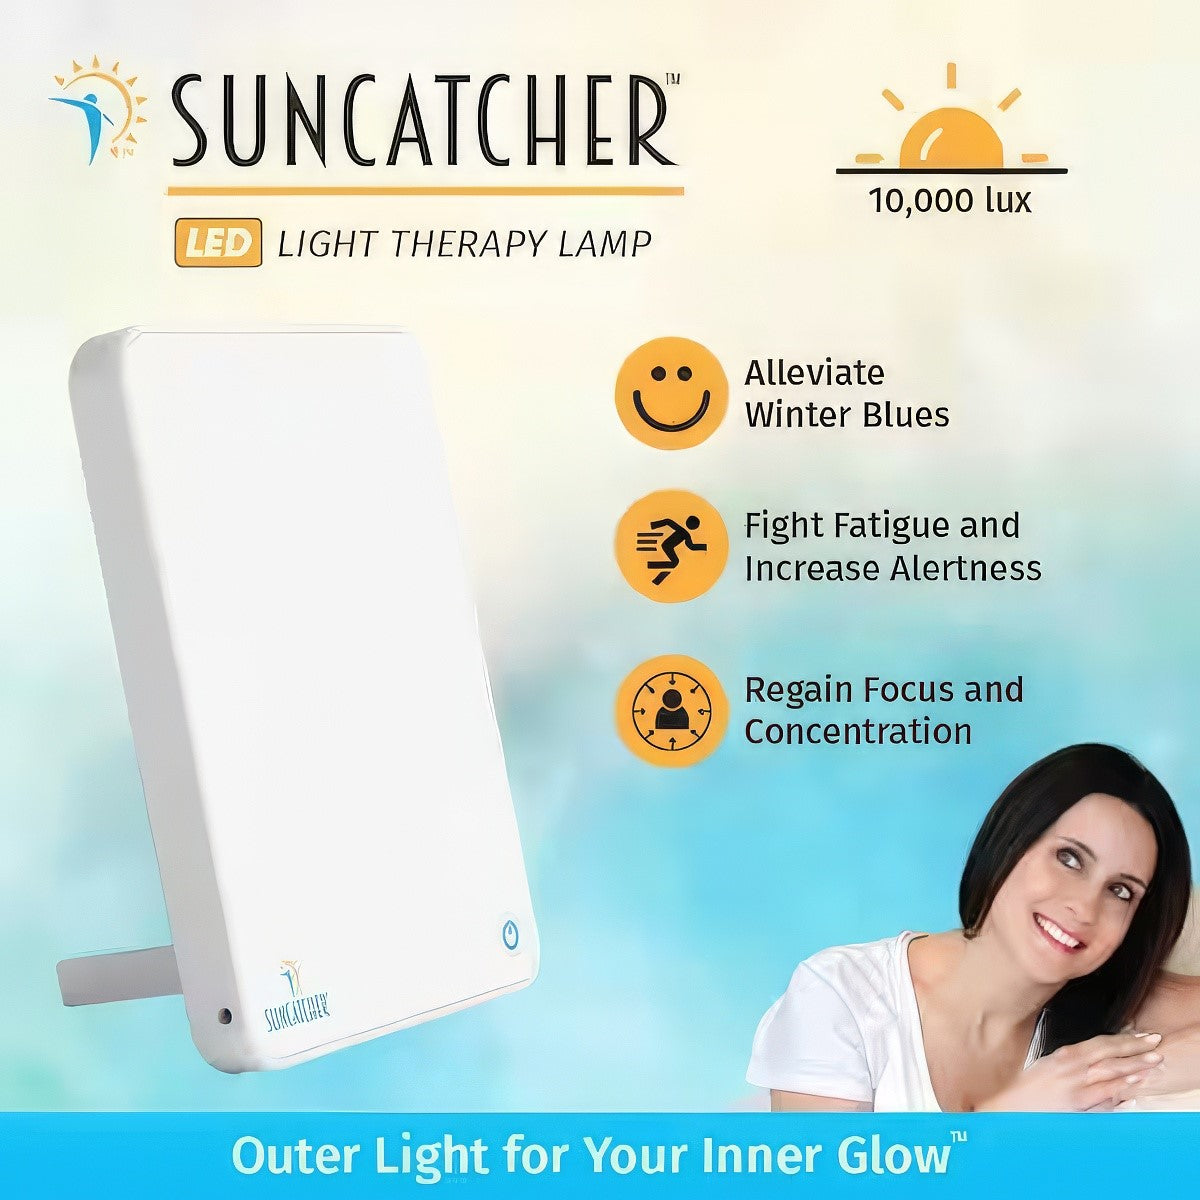 Suncatcher Ultra LED Light Therapy Lamp – Alleviate The Winter Blues